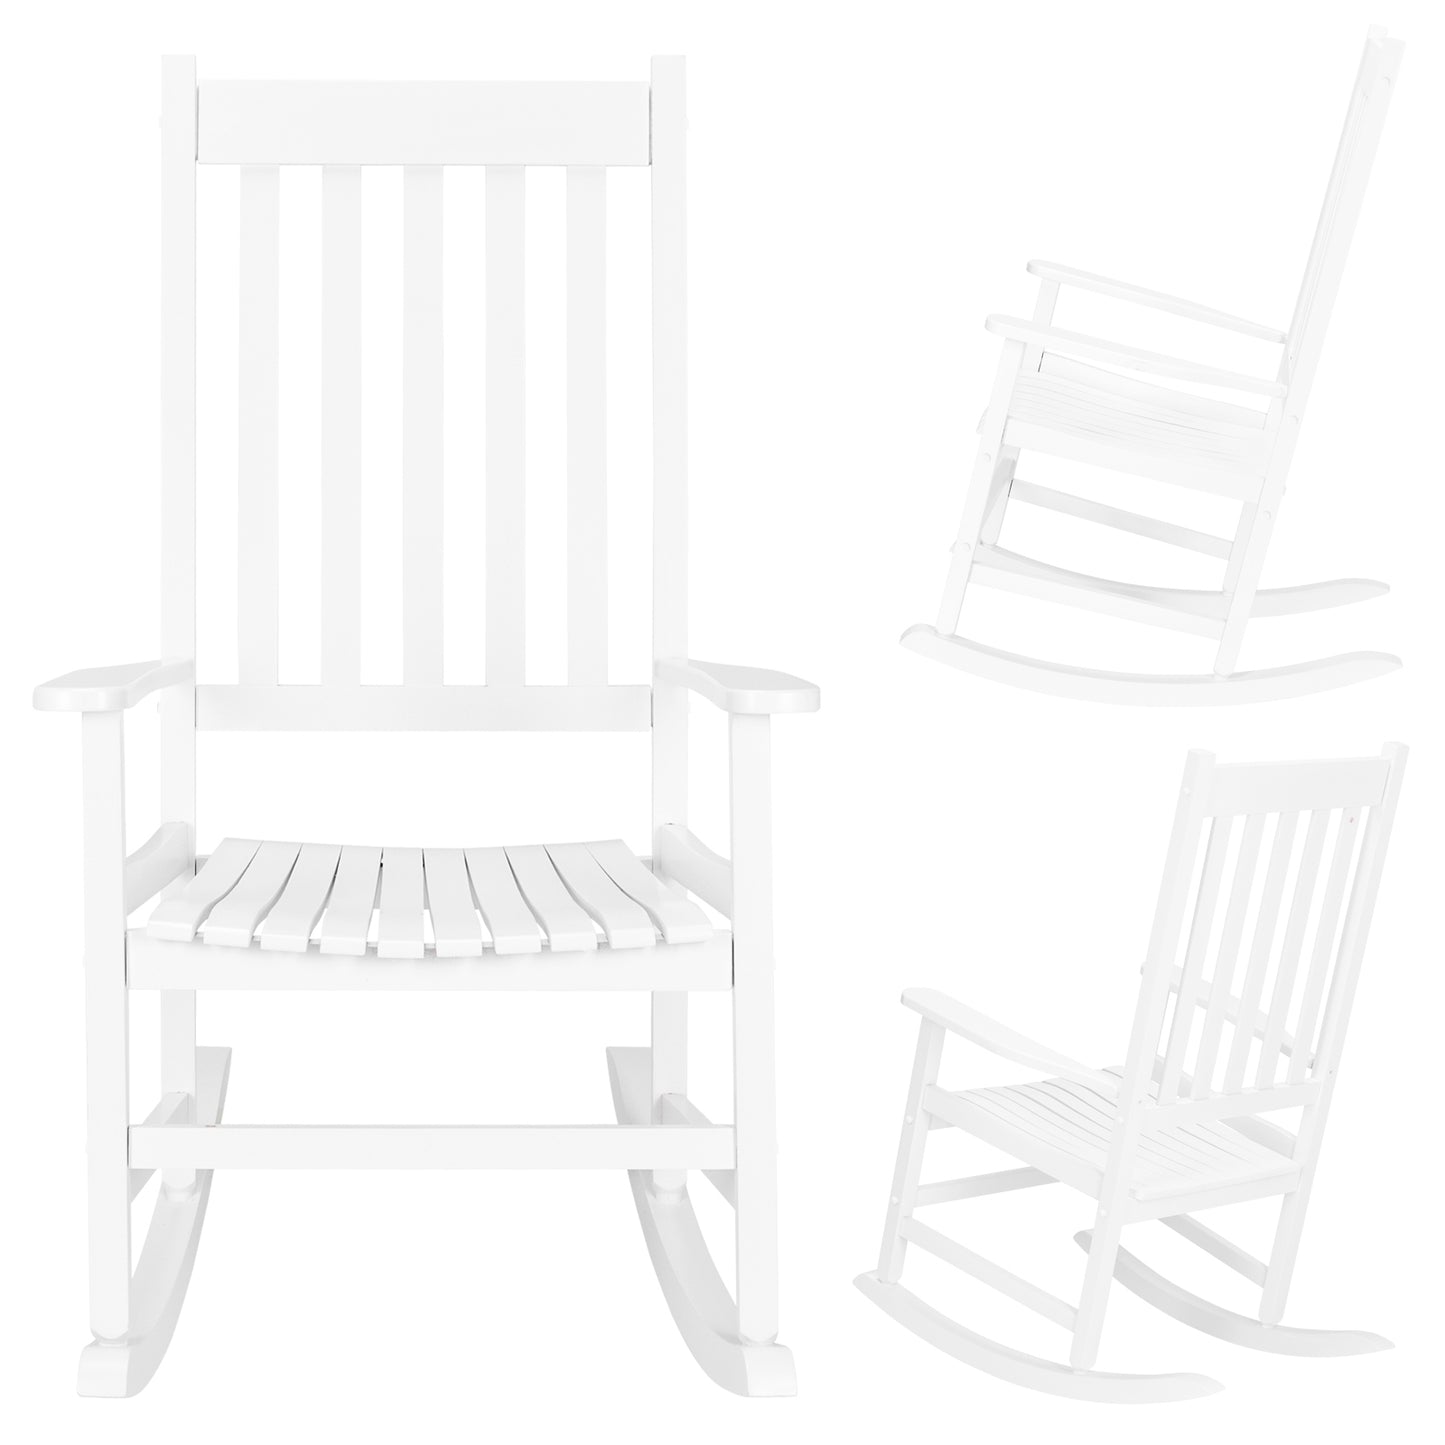 68.5*86*115CM Square Wooden Rocking Chair White